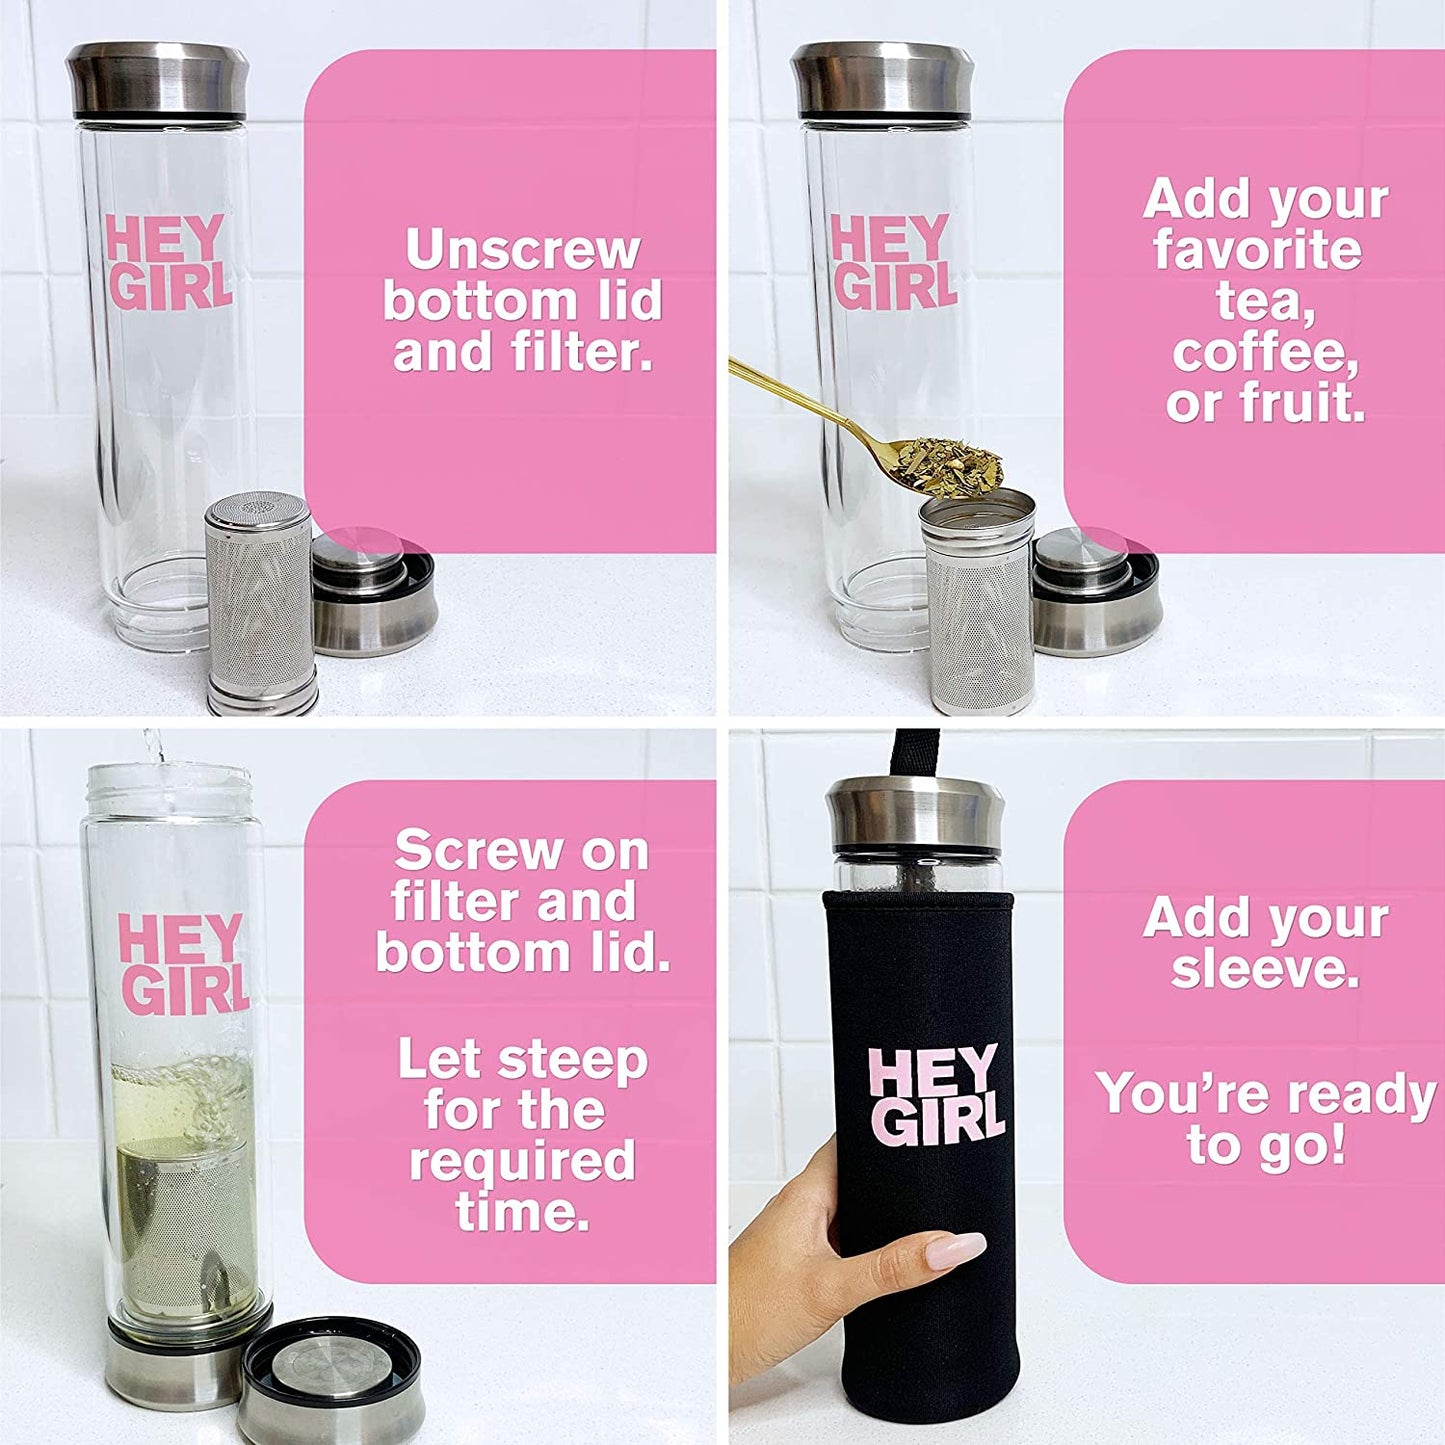 Hey Girl Glass Water Bottle Tea Infuser - 14Oz Insulated Glass Bottles with Tea Steeper & Silicone Sleeve for Loose Leaf Tea & Infused Fruit - Travel Tea Brewer Tumbler Mug - Gifts for Tea Drinkers